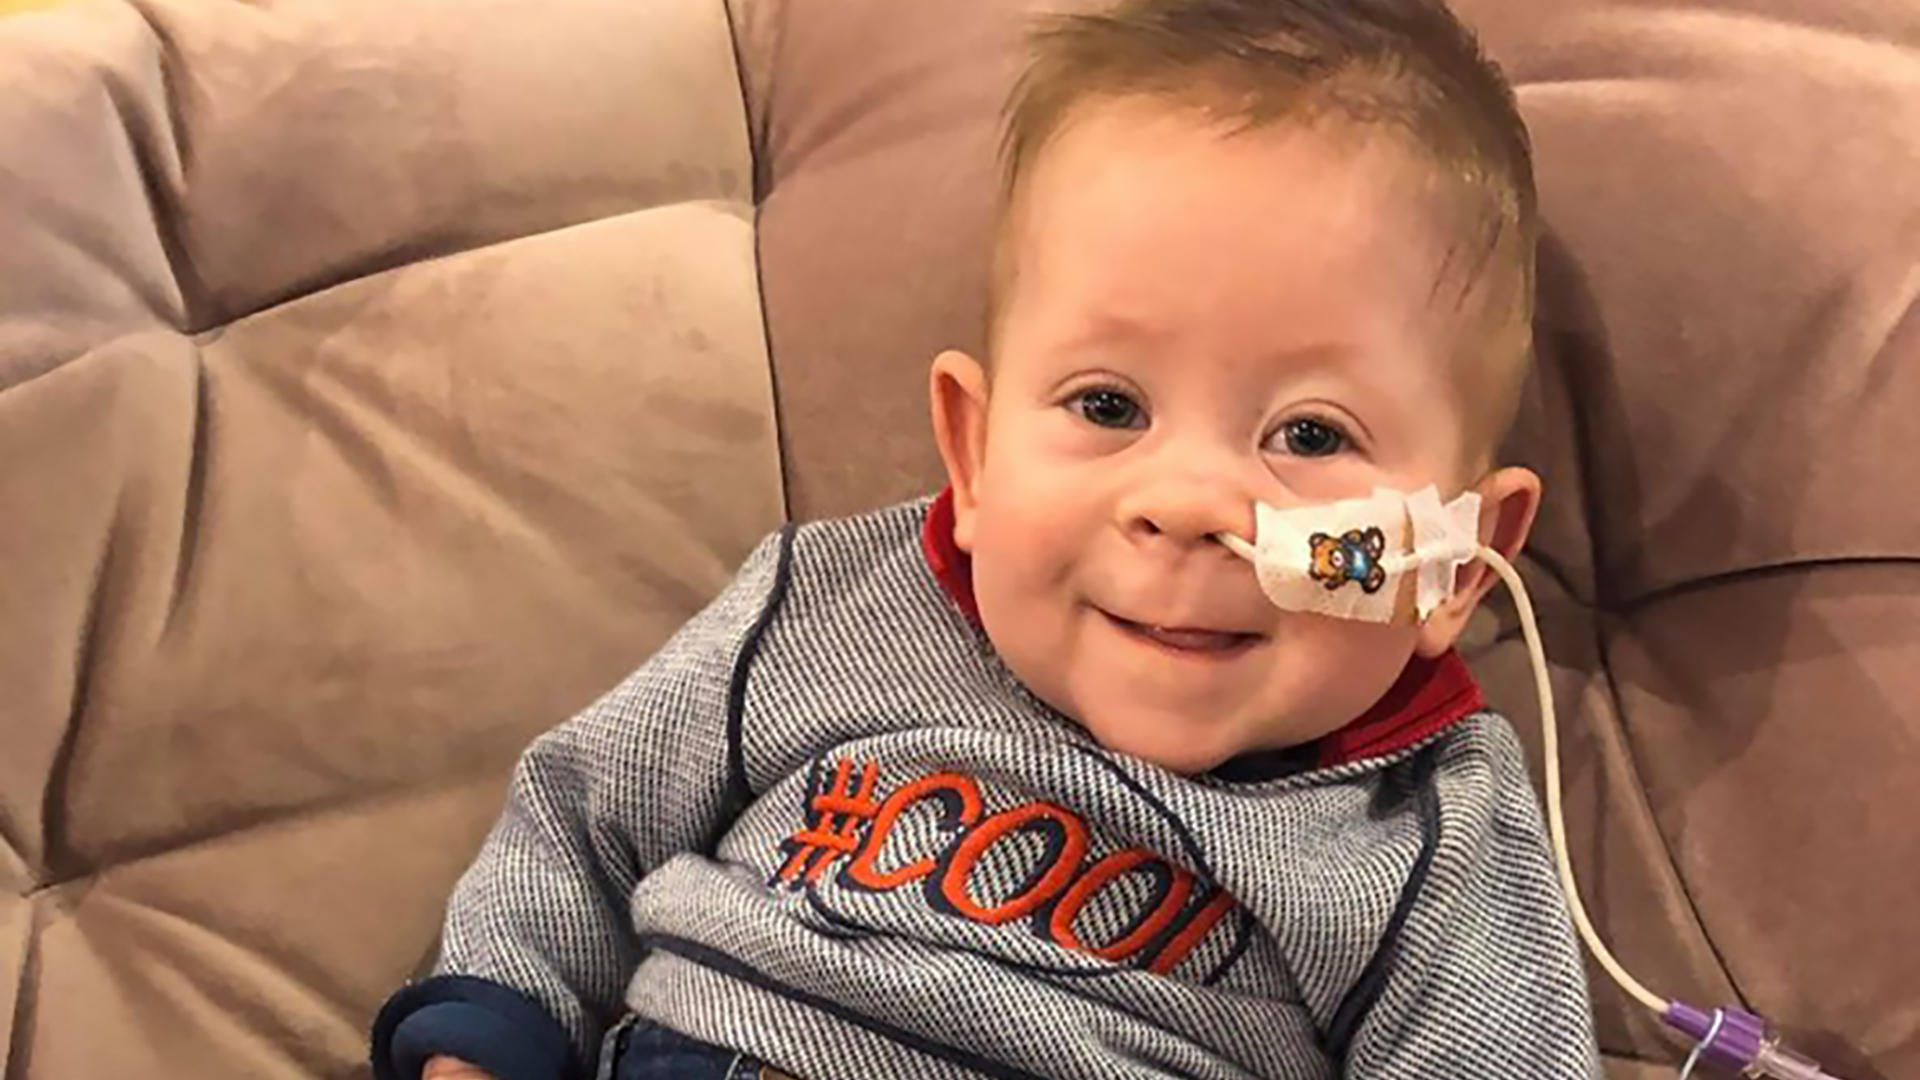 ‘Miracle baby’ recovering after life-saving surgery